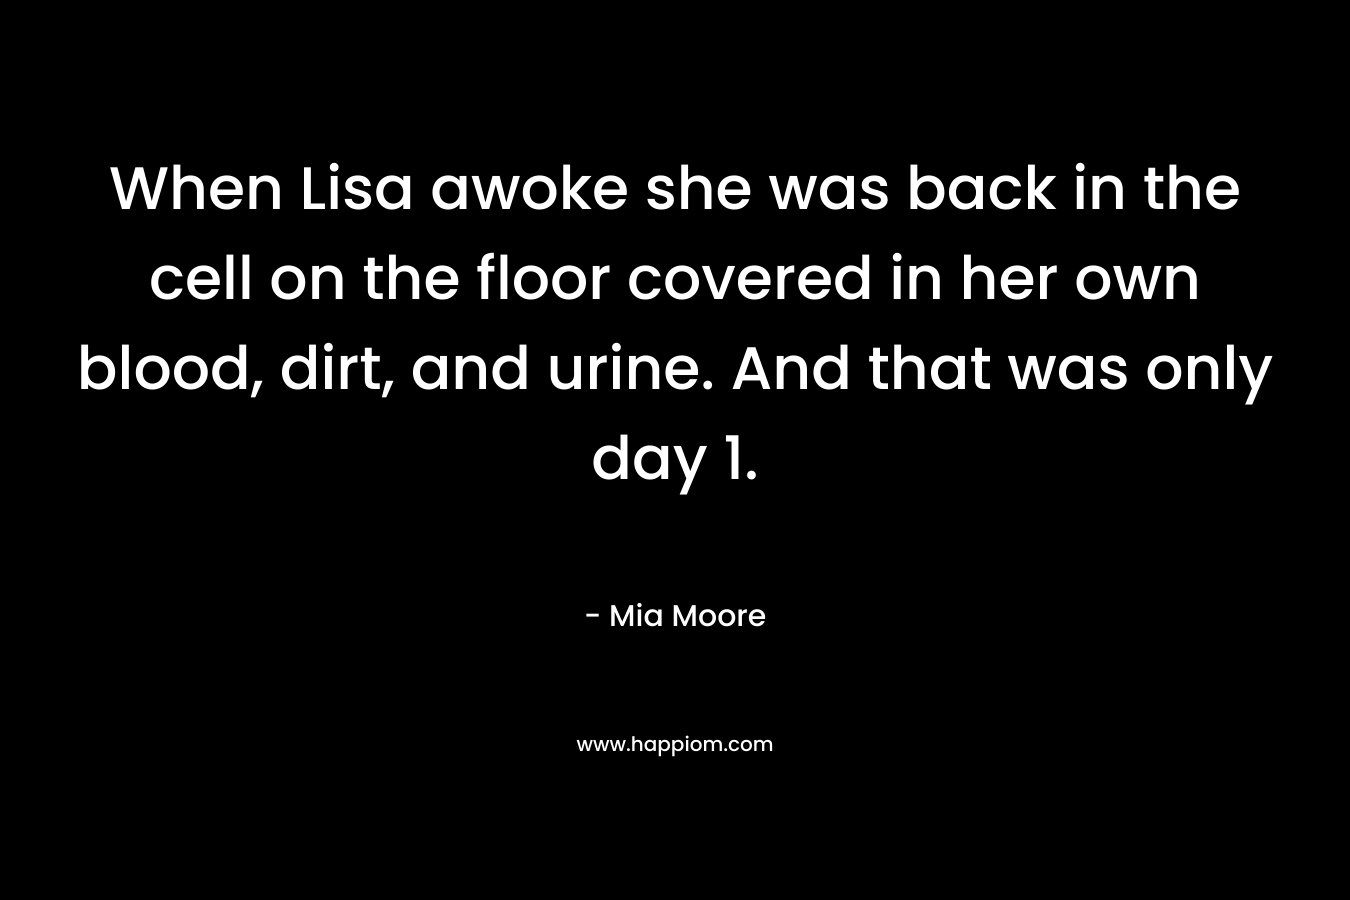 When Lisa awoke she was back in the cell on the floor covered in her own blood, dirt, and urine. And that was only day 1. – Mia Moore